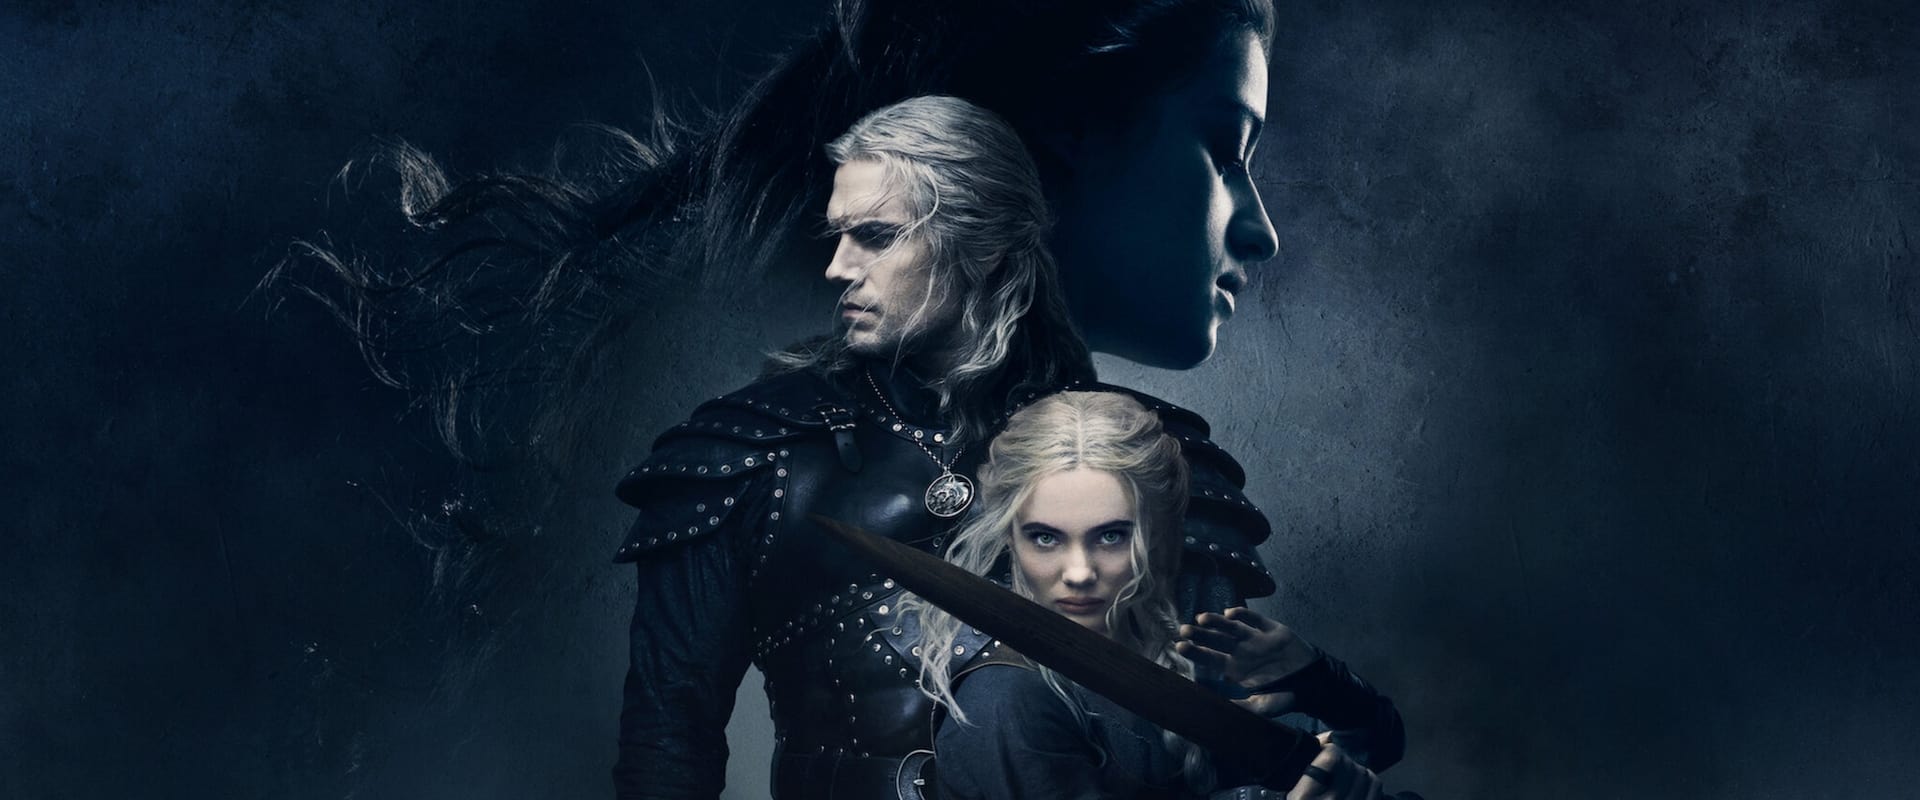 The Witcher [HD]